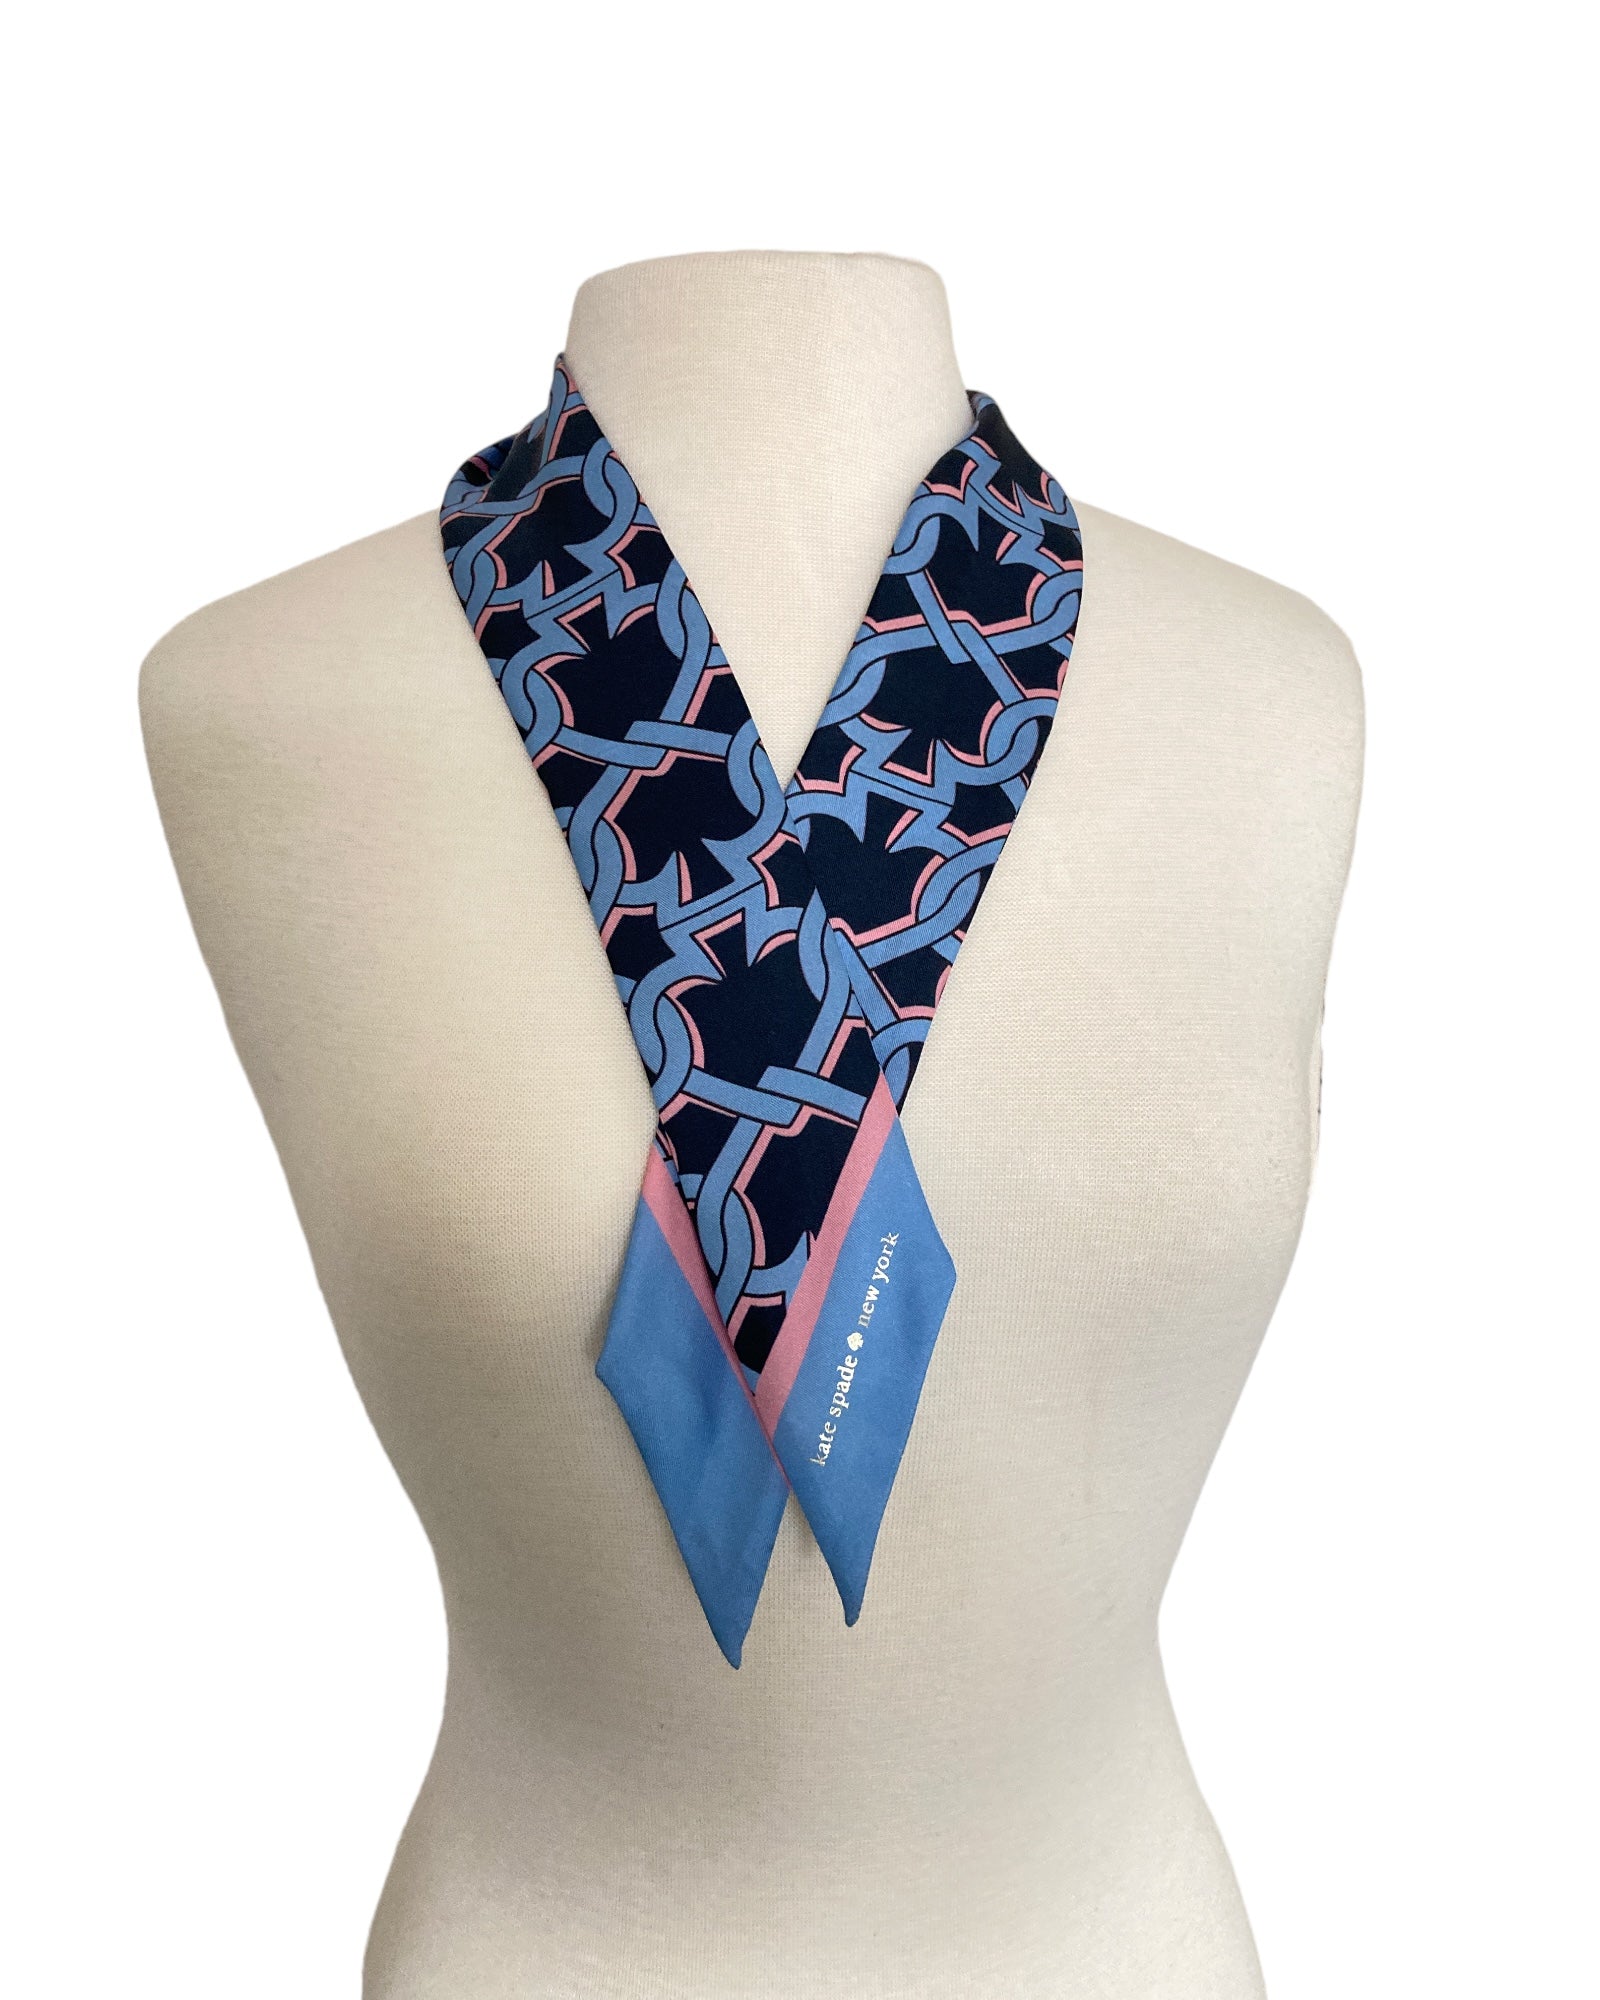 Kate Spade Navy, Blue and Pink Skinny Scarf